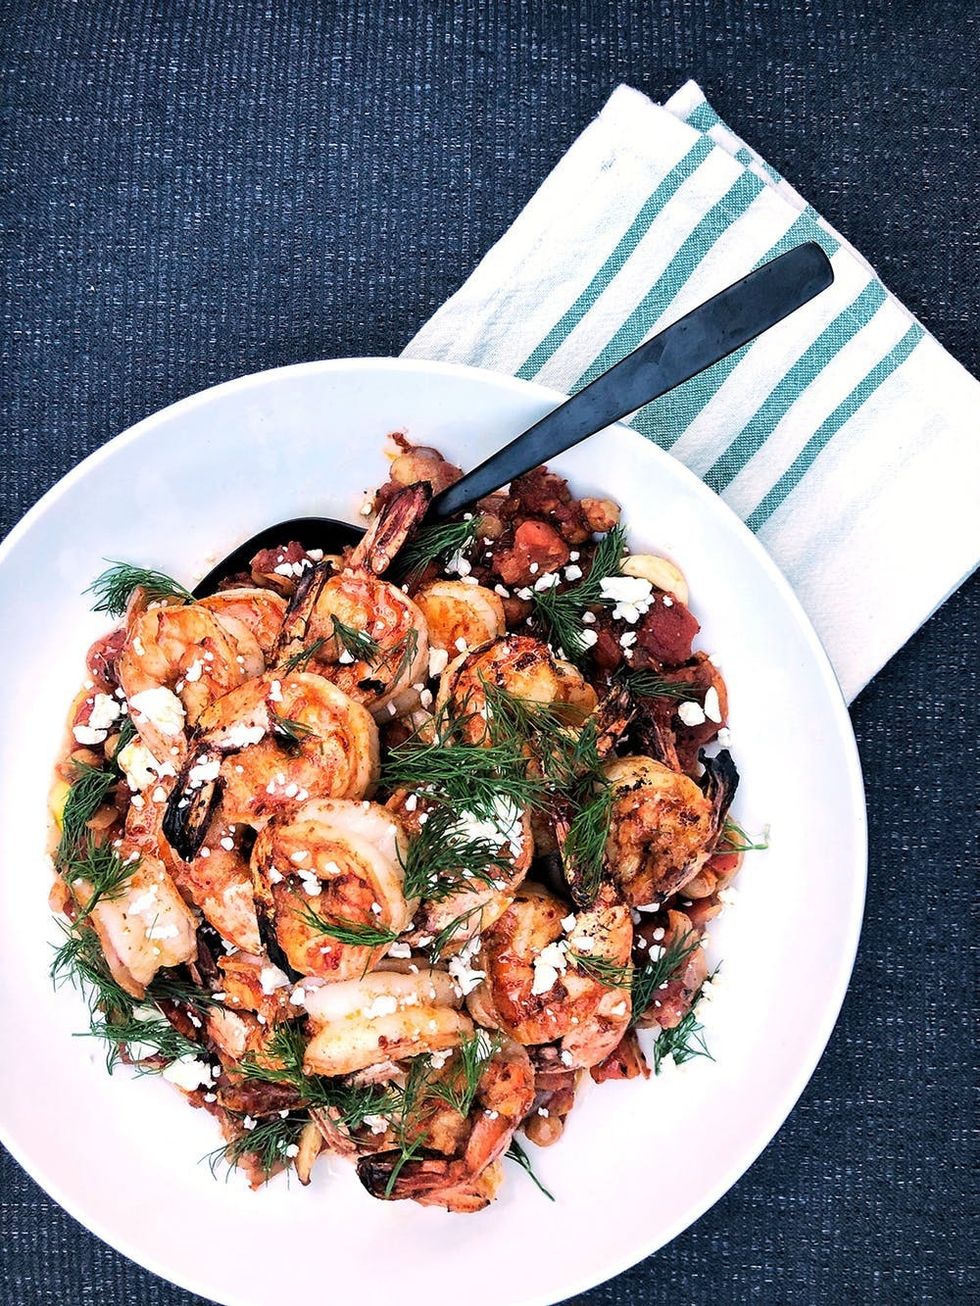 Grilled Harissa Shrimp With Chickpea-Dill Tomato Sauce